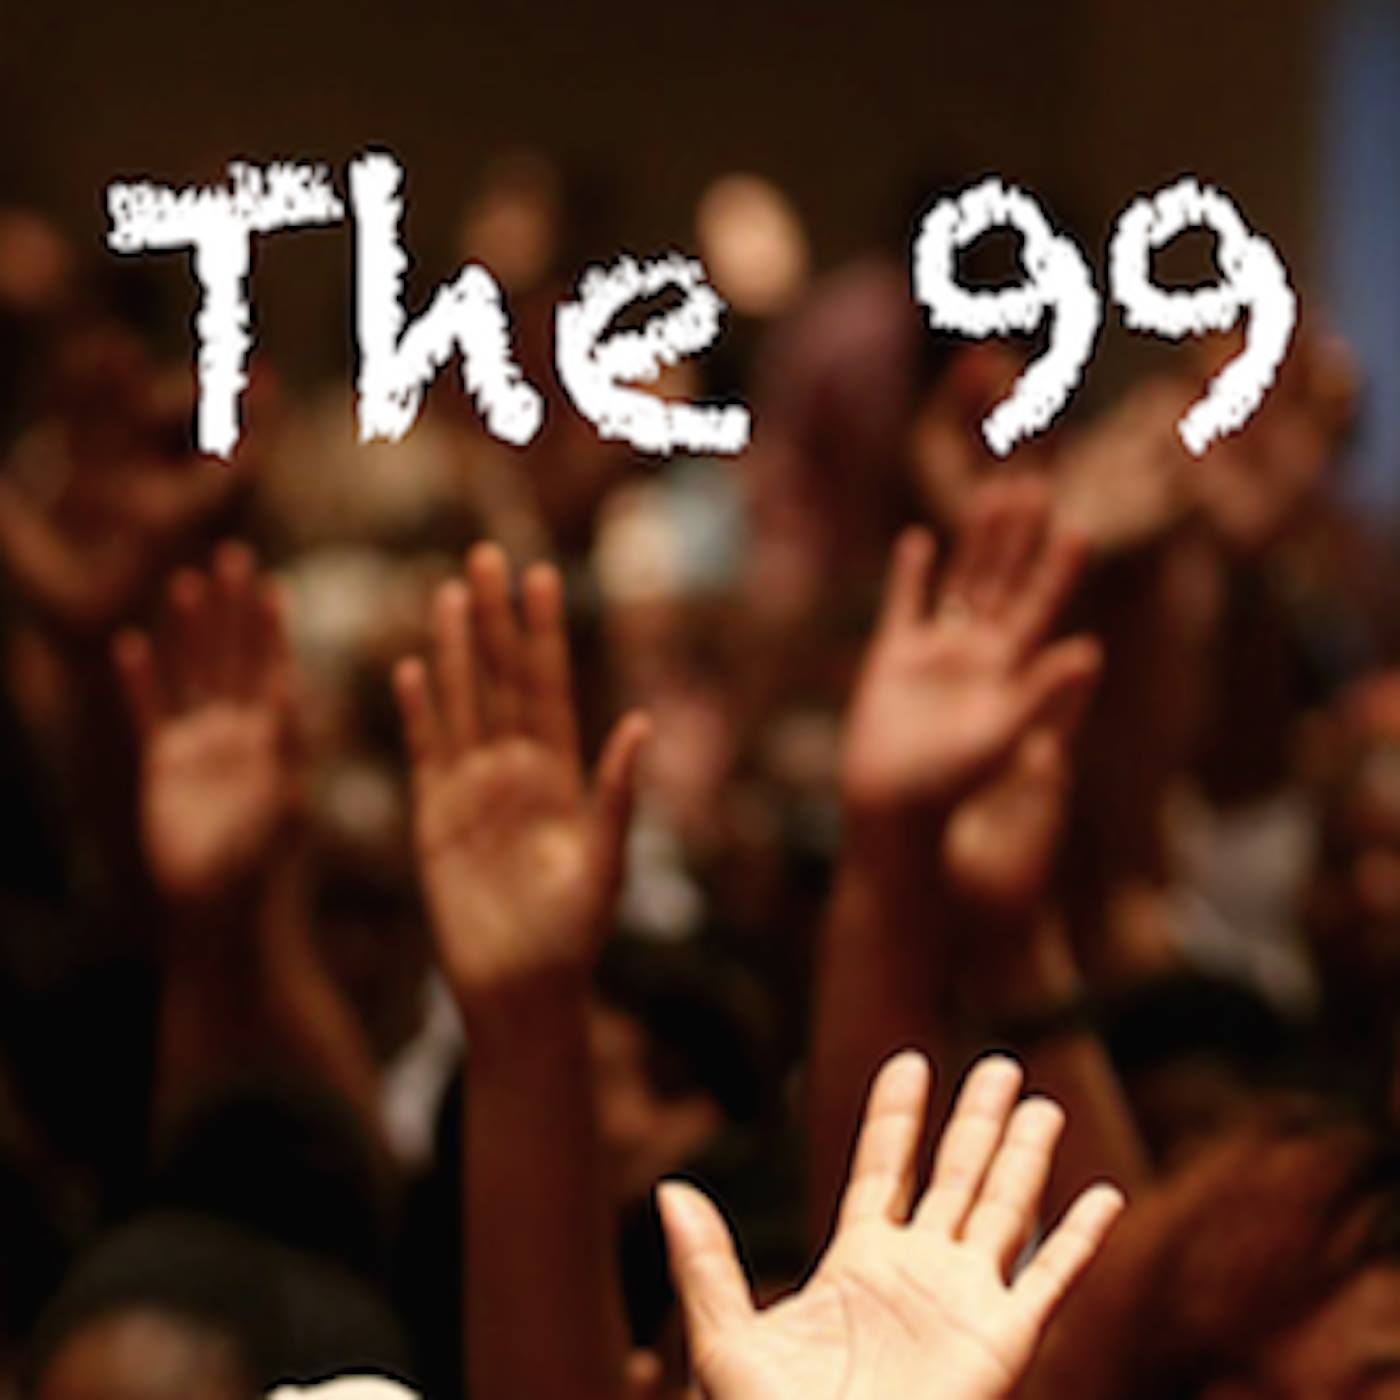  The 99 – “Rough Times In America,” “We Ain’t Buyin,’” “Do You Wanna Go”